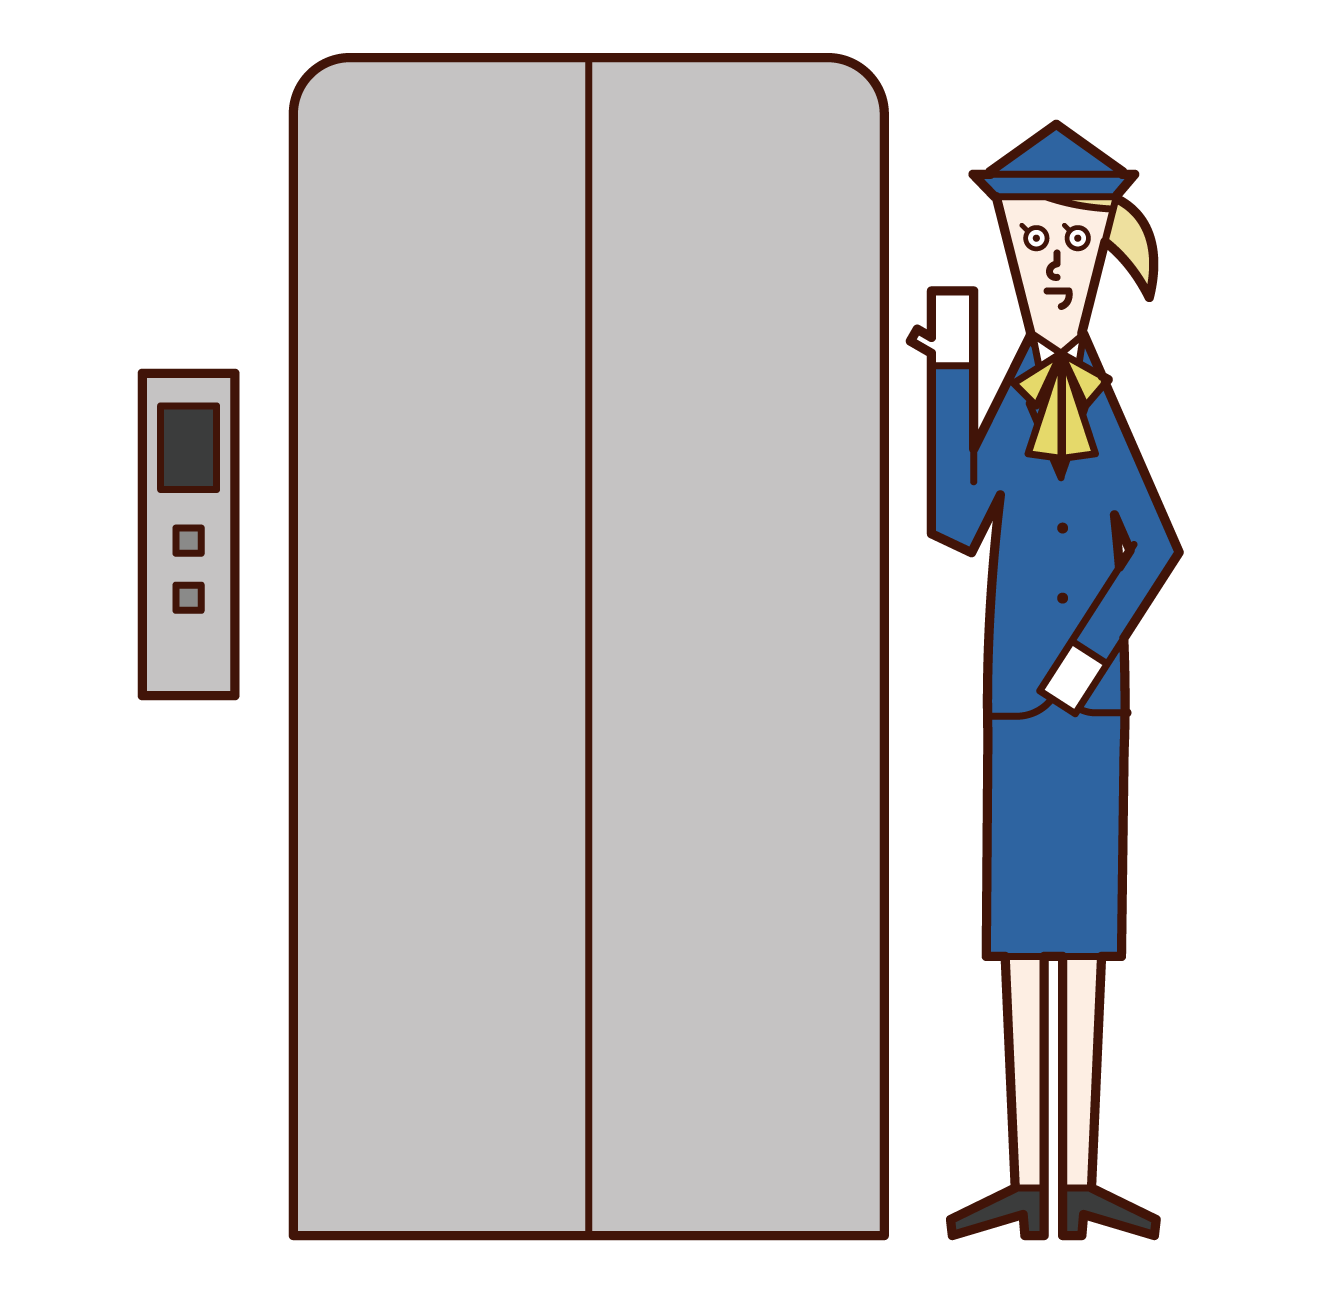 Illustration of elevator girl (woman) in a department store